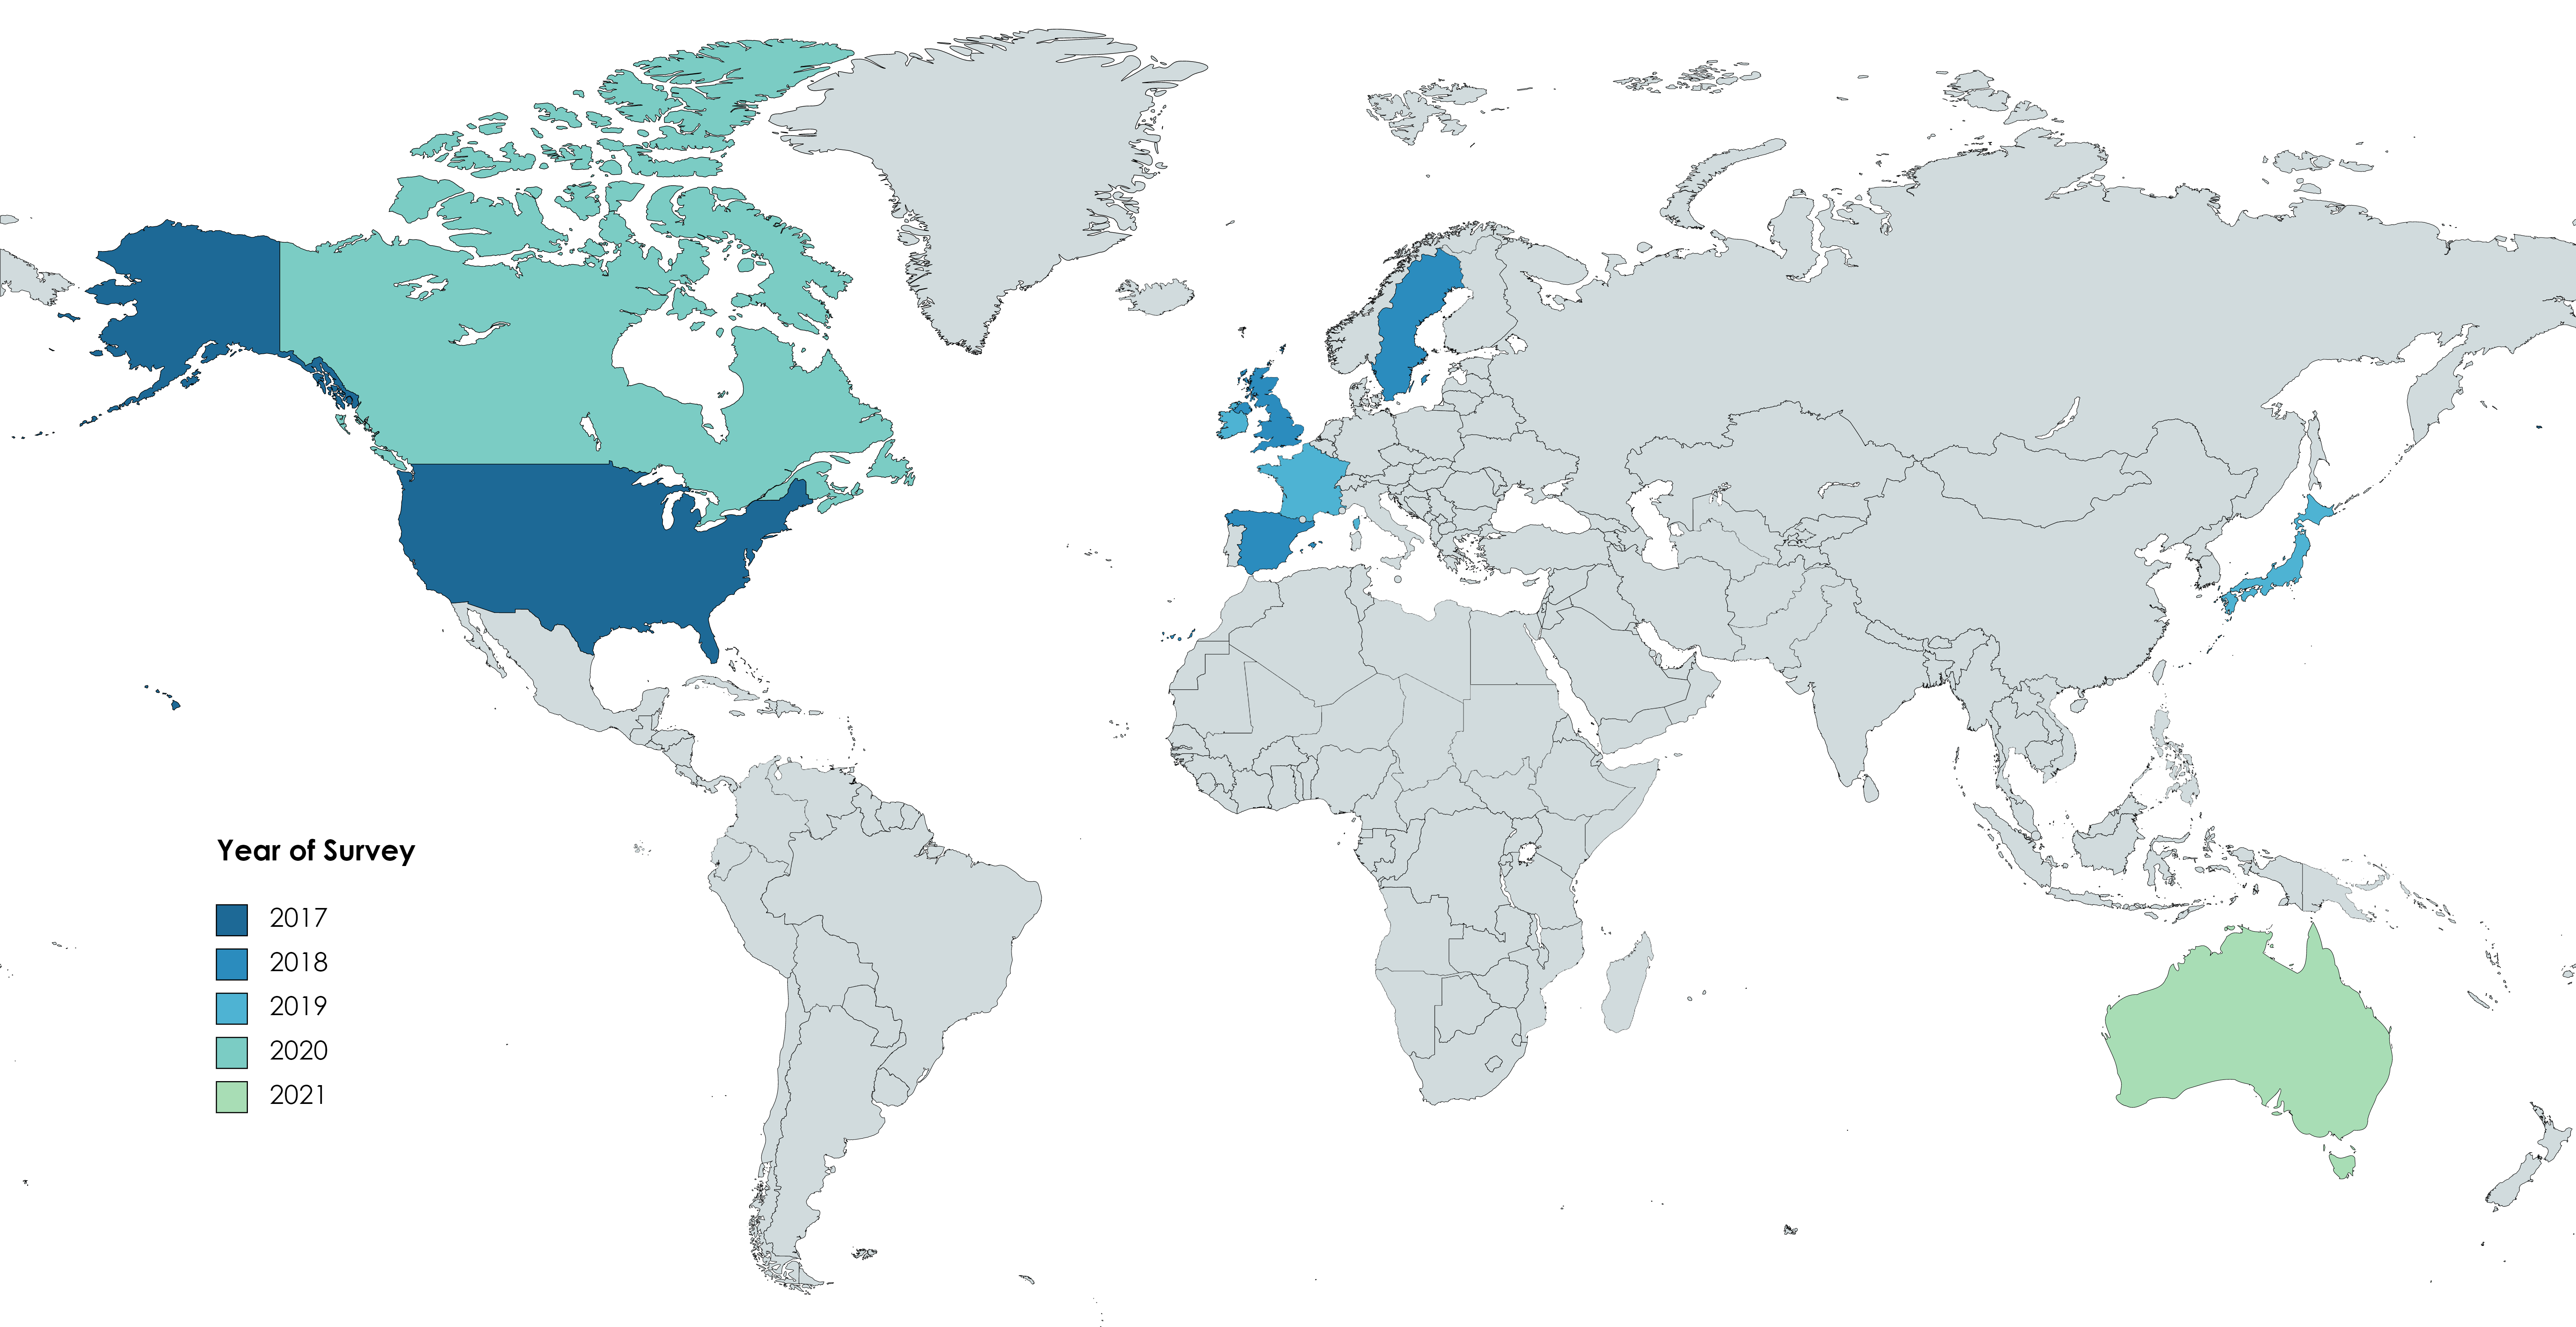 Map of surveyed countries by year